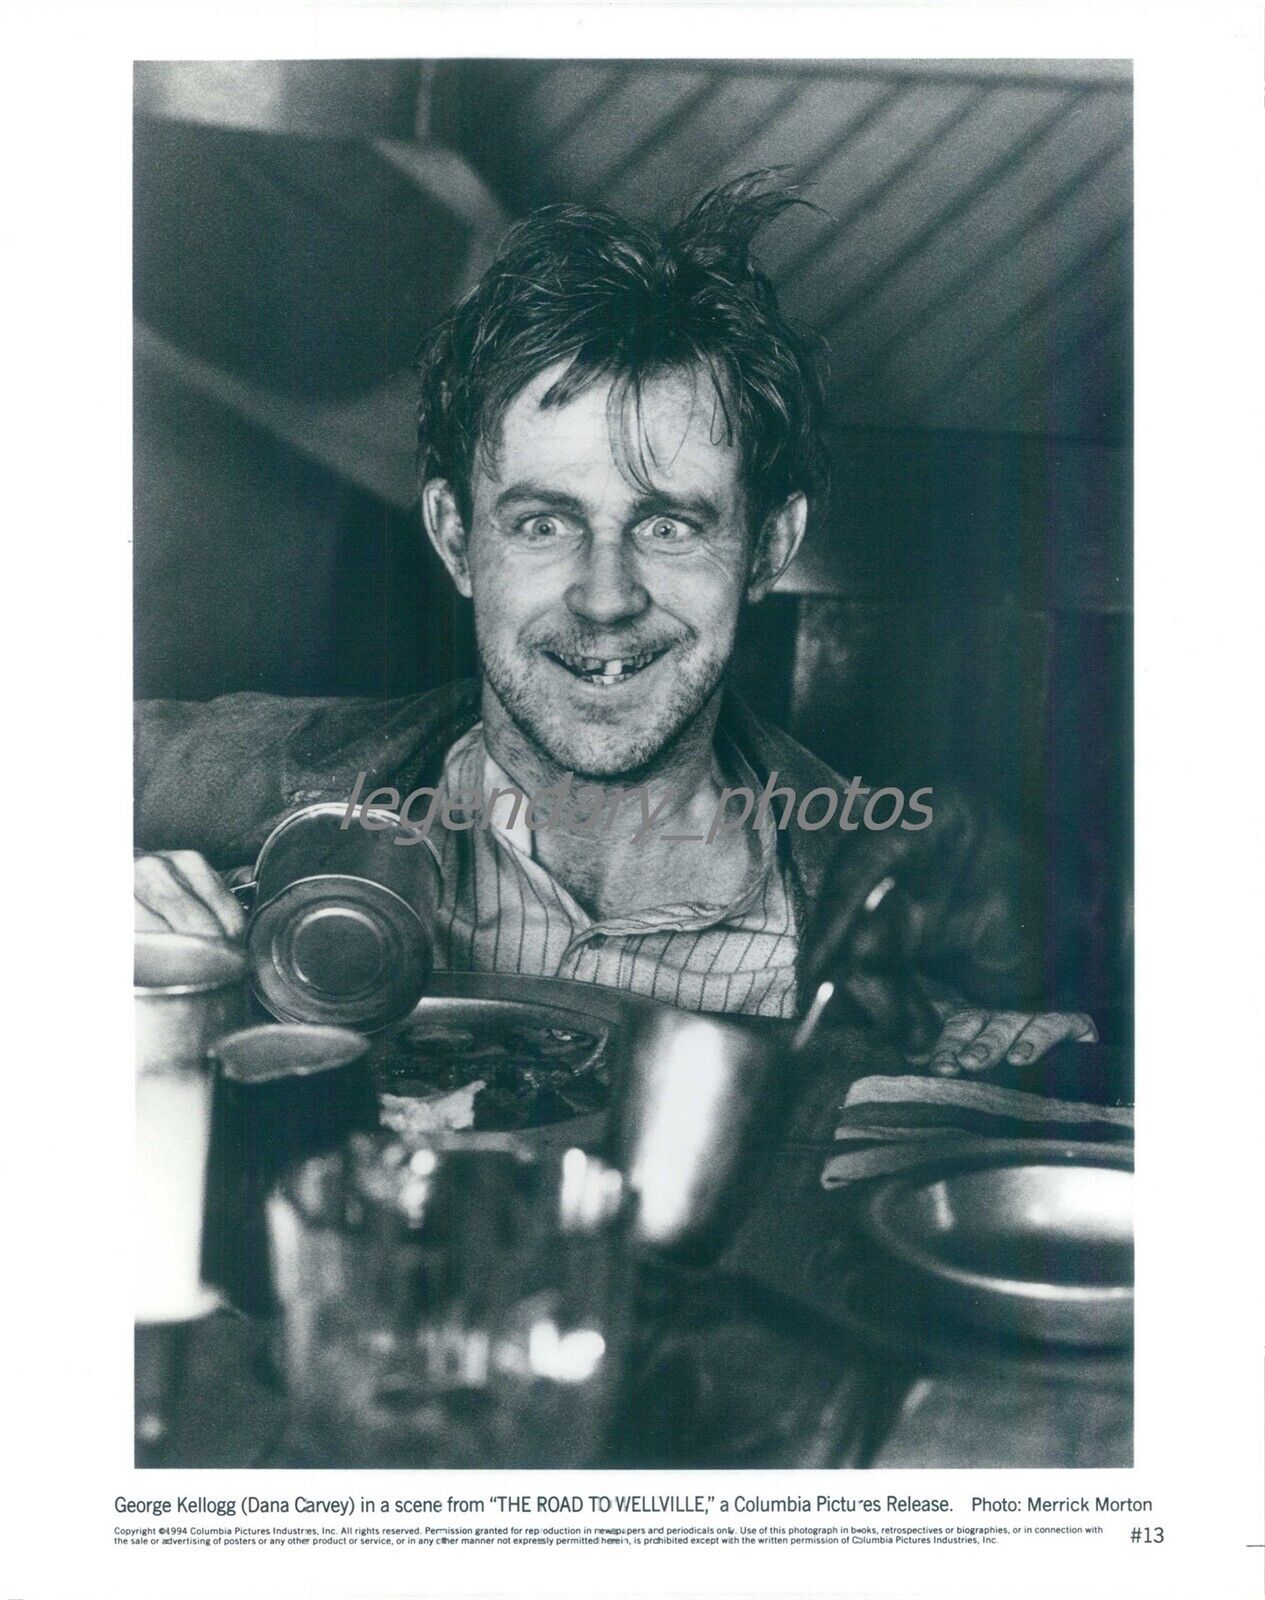 1994 Actor Comedian Dana Carvey in Road to Wellville Original News Service Photo